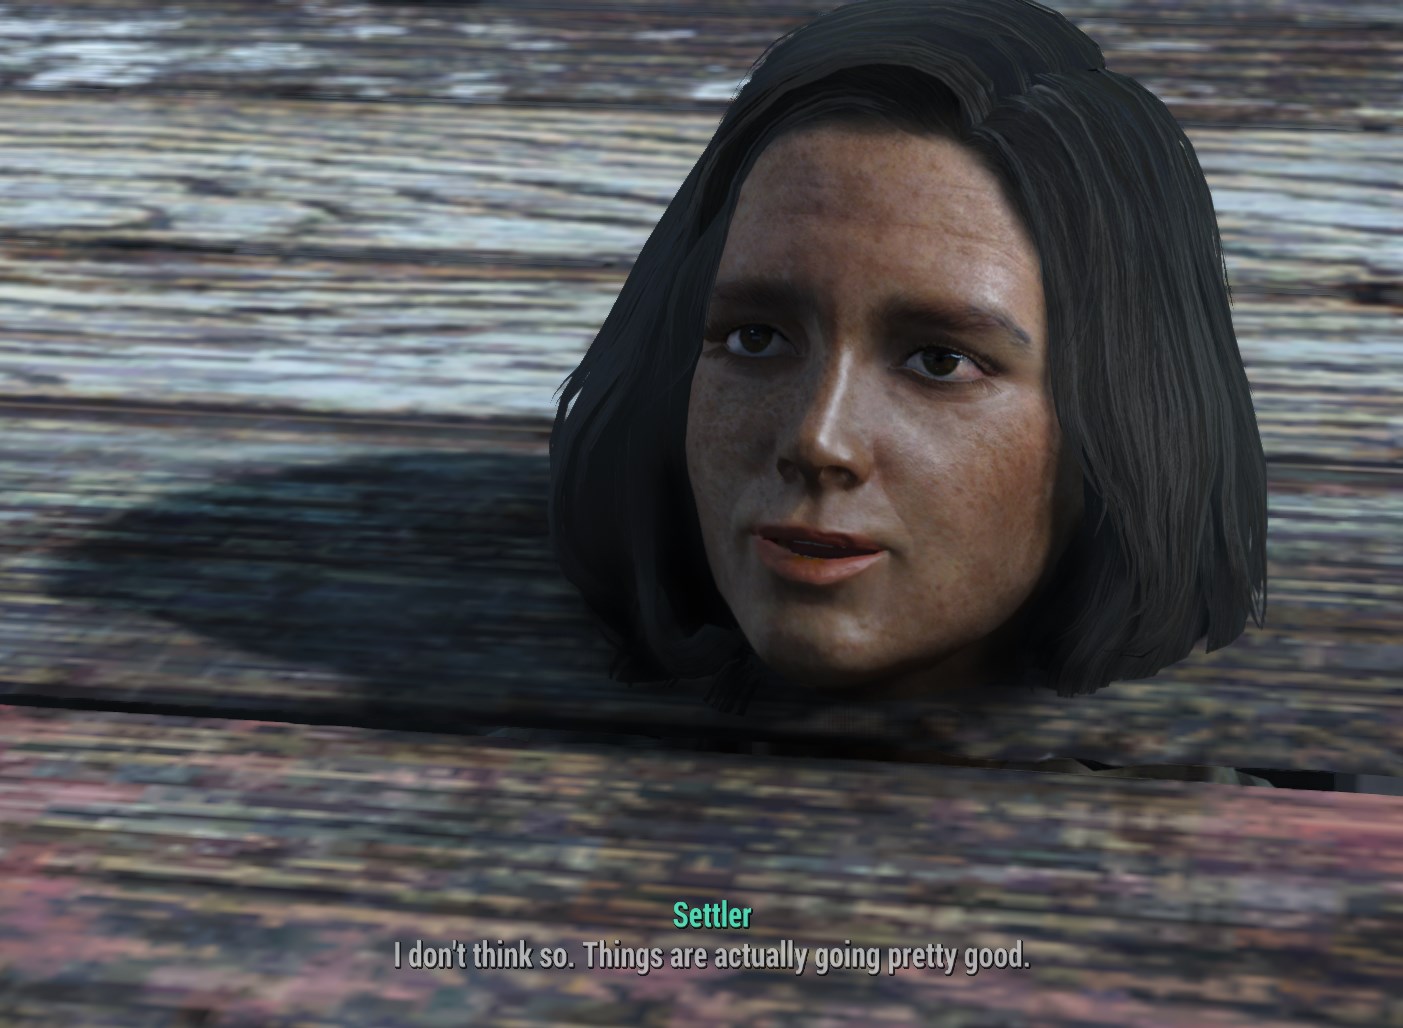 fallout 4 pillory - Settler I don't think so. Things are actually going pretty good.